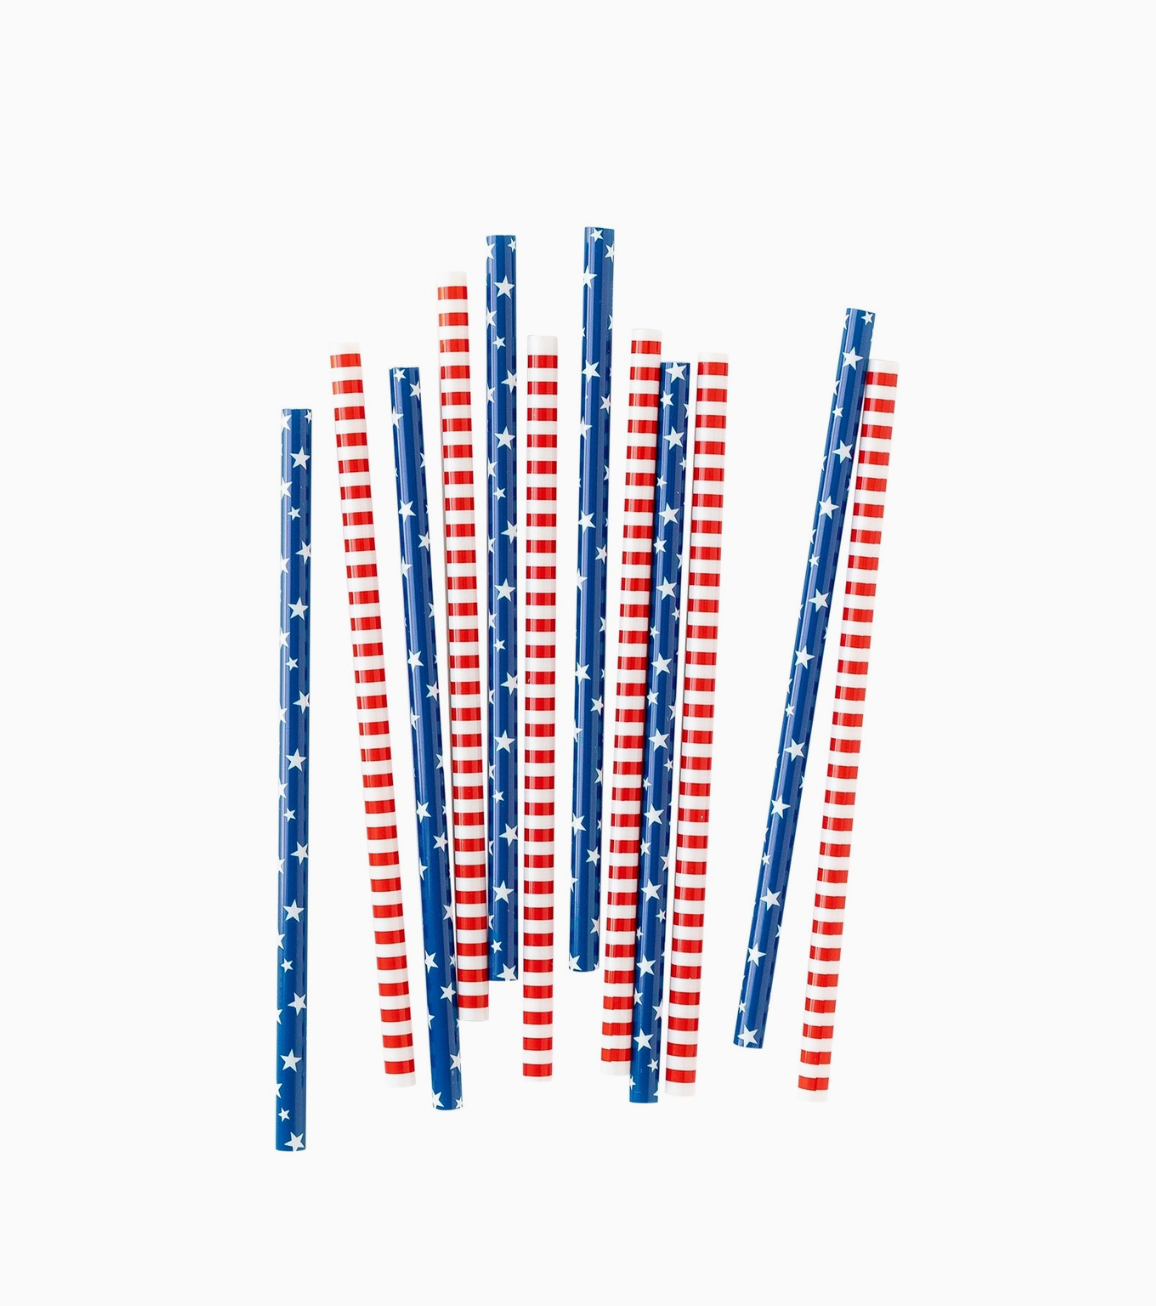 Let Freedom Ring Party Cup Reusable Cocktail Cup Dishwasher Safe, Fourth of July Party Supplies, Memorial Day Party Supplies, Red White and Blue Straws